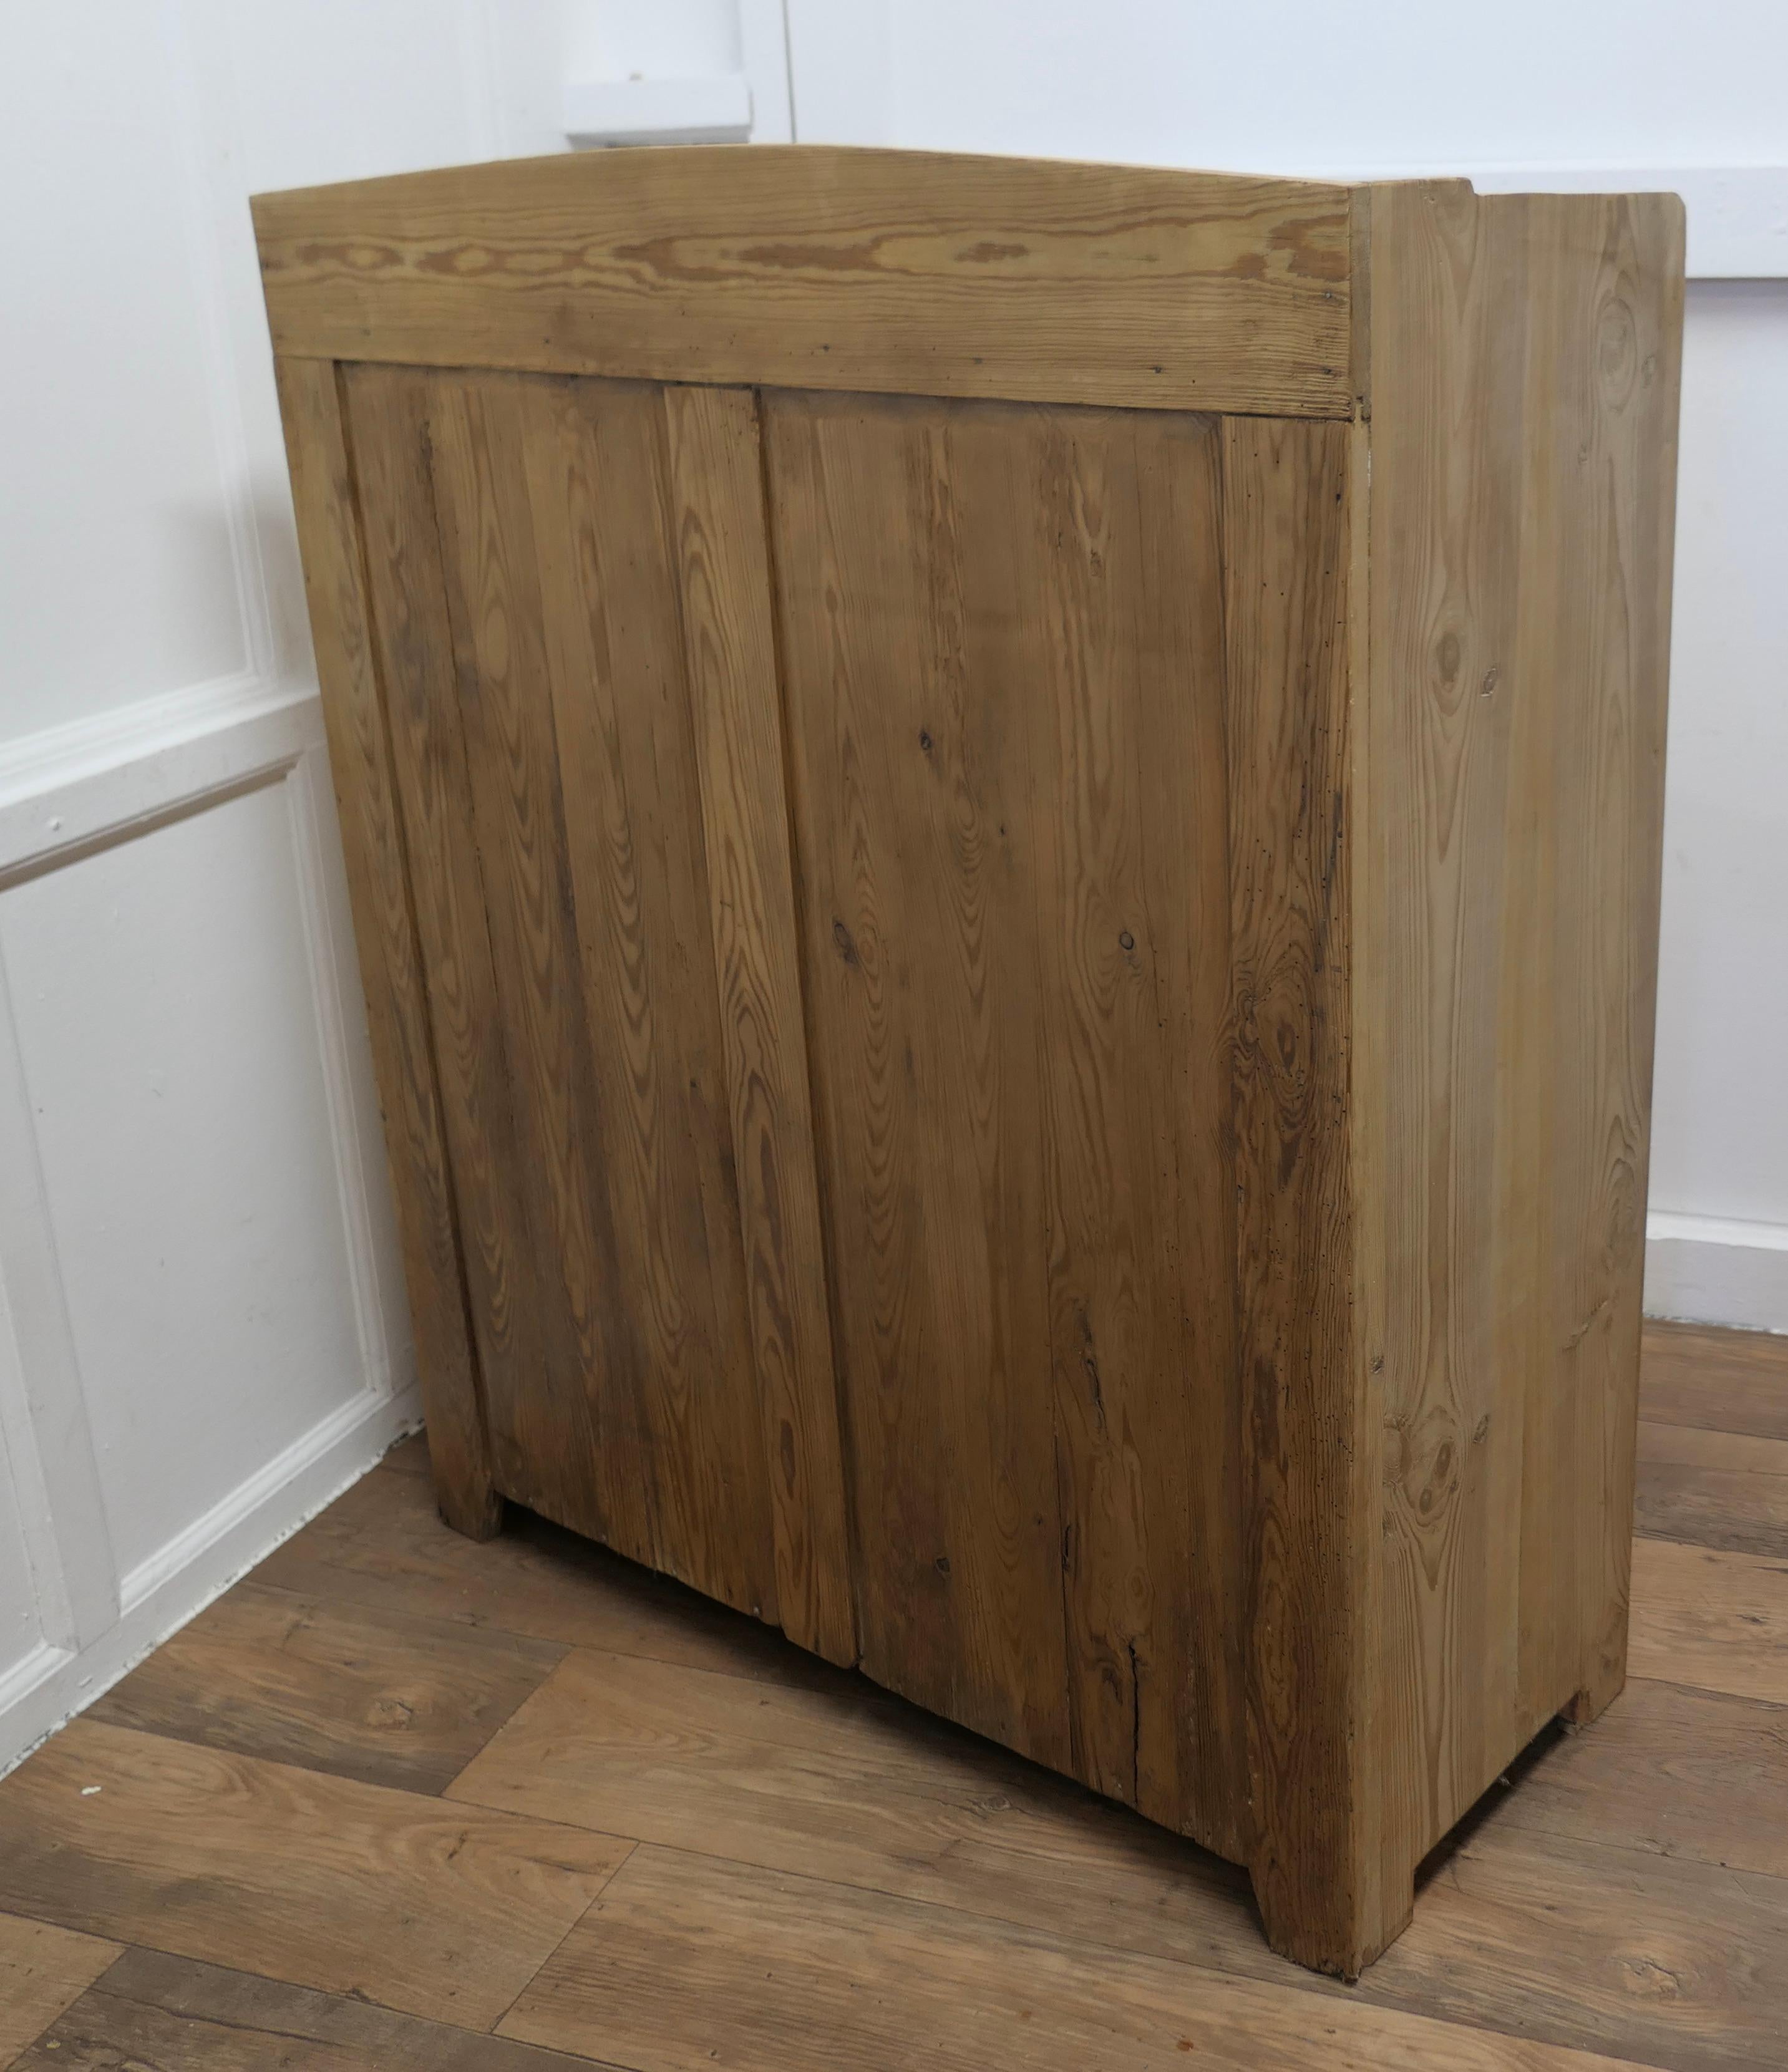 Victorian Stripped Pine Greeting Station Cupboard 

This is a very good quality cupboard, it has  been used as a Restaurant Greeting Station, it has a panelled front and a flat galleried top, 3 deep storage drawers and a tall cupboard below with